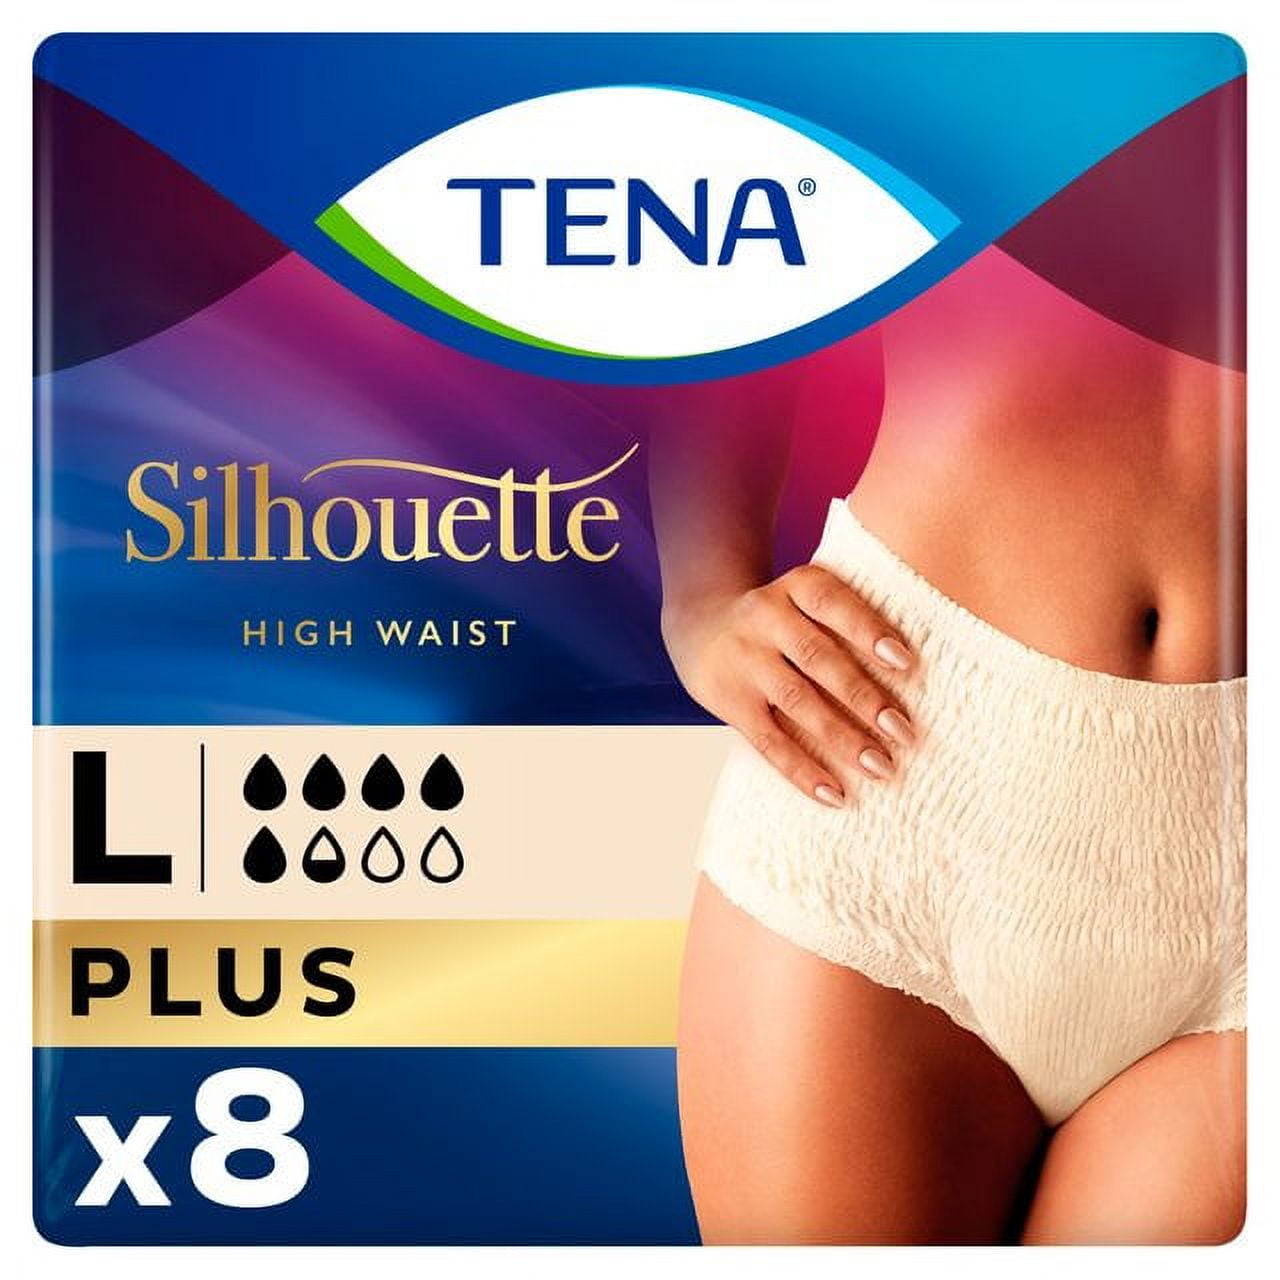 TENA Lady Silhouette Incontinence Pants Plus Large 8 per pack - European  Version NOT North American Variety - Imported from United Kingdom by  Sentogo